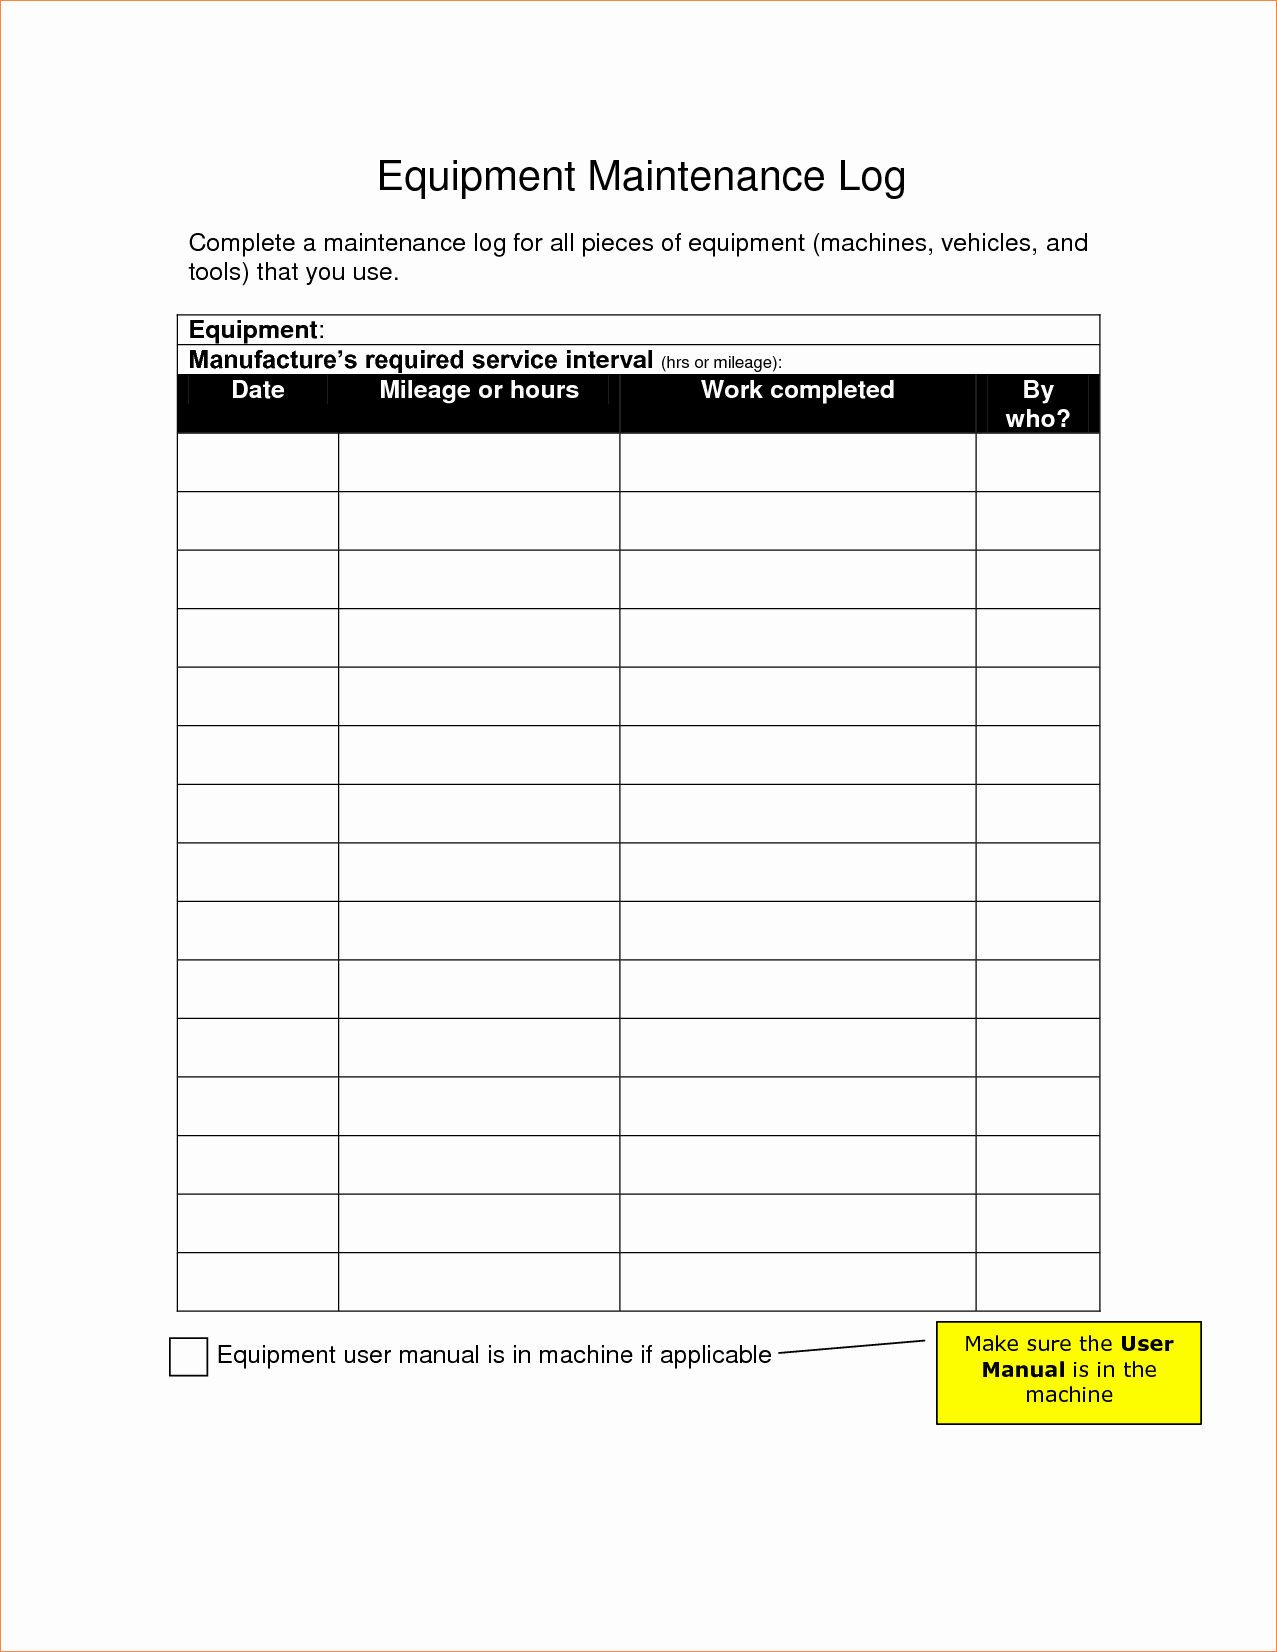 Equipment Maintenance Log Template Awesome 4 Equipment Maintenance Log Template